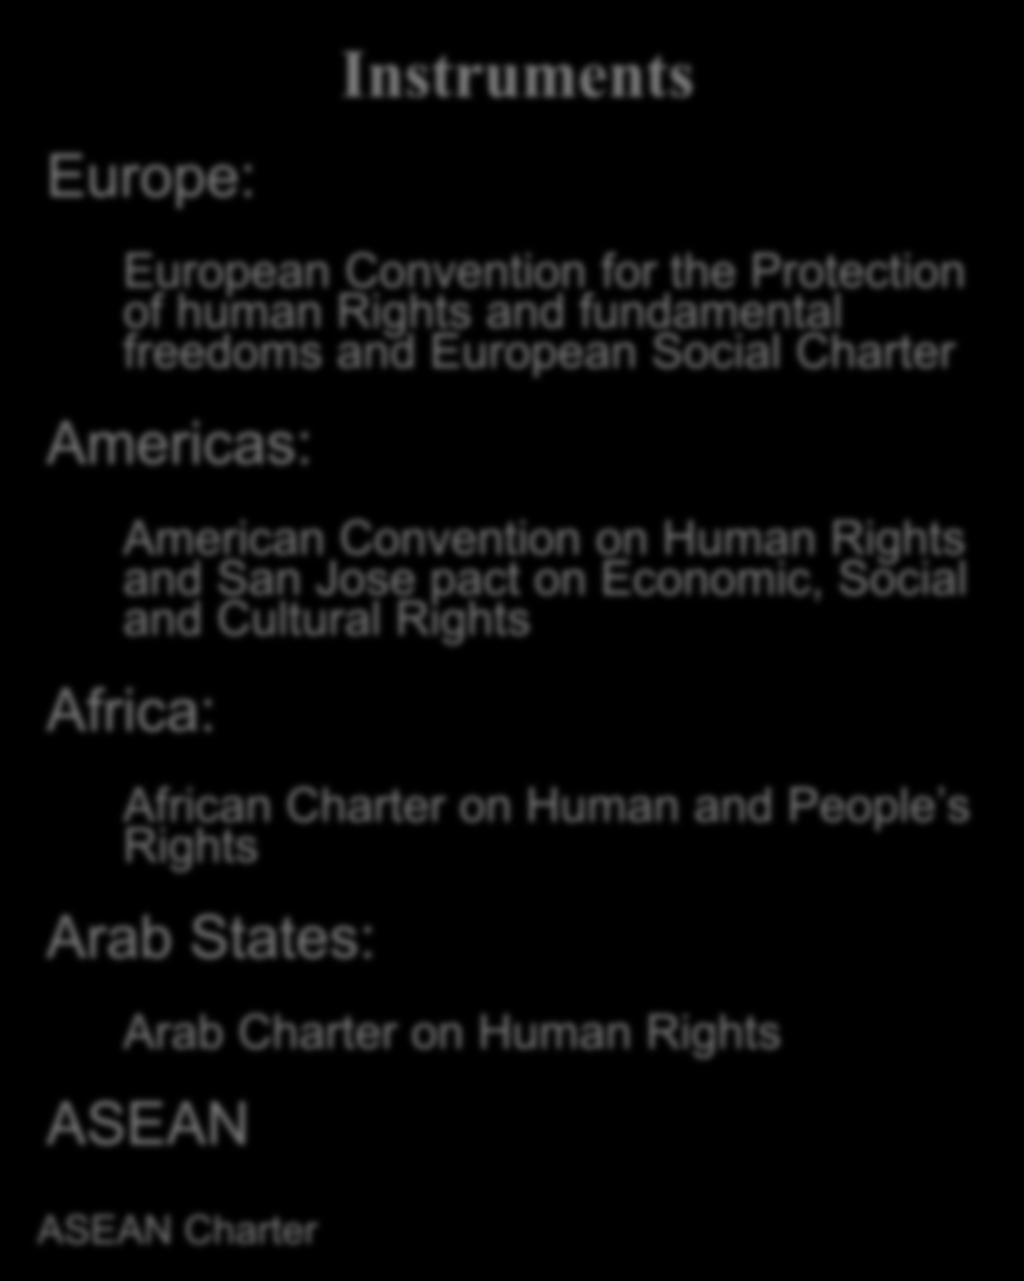 Regional Human Rights Systems From: UN Common Learning package on the Human Rights-Based approach Europe: Instruments European Convention for the Protection of human Rights and fundamental freedoms